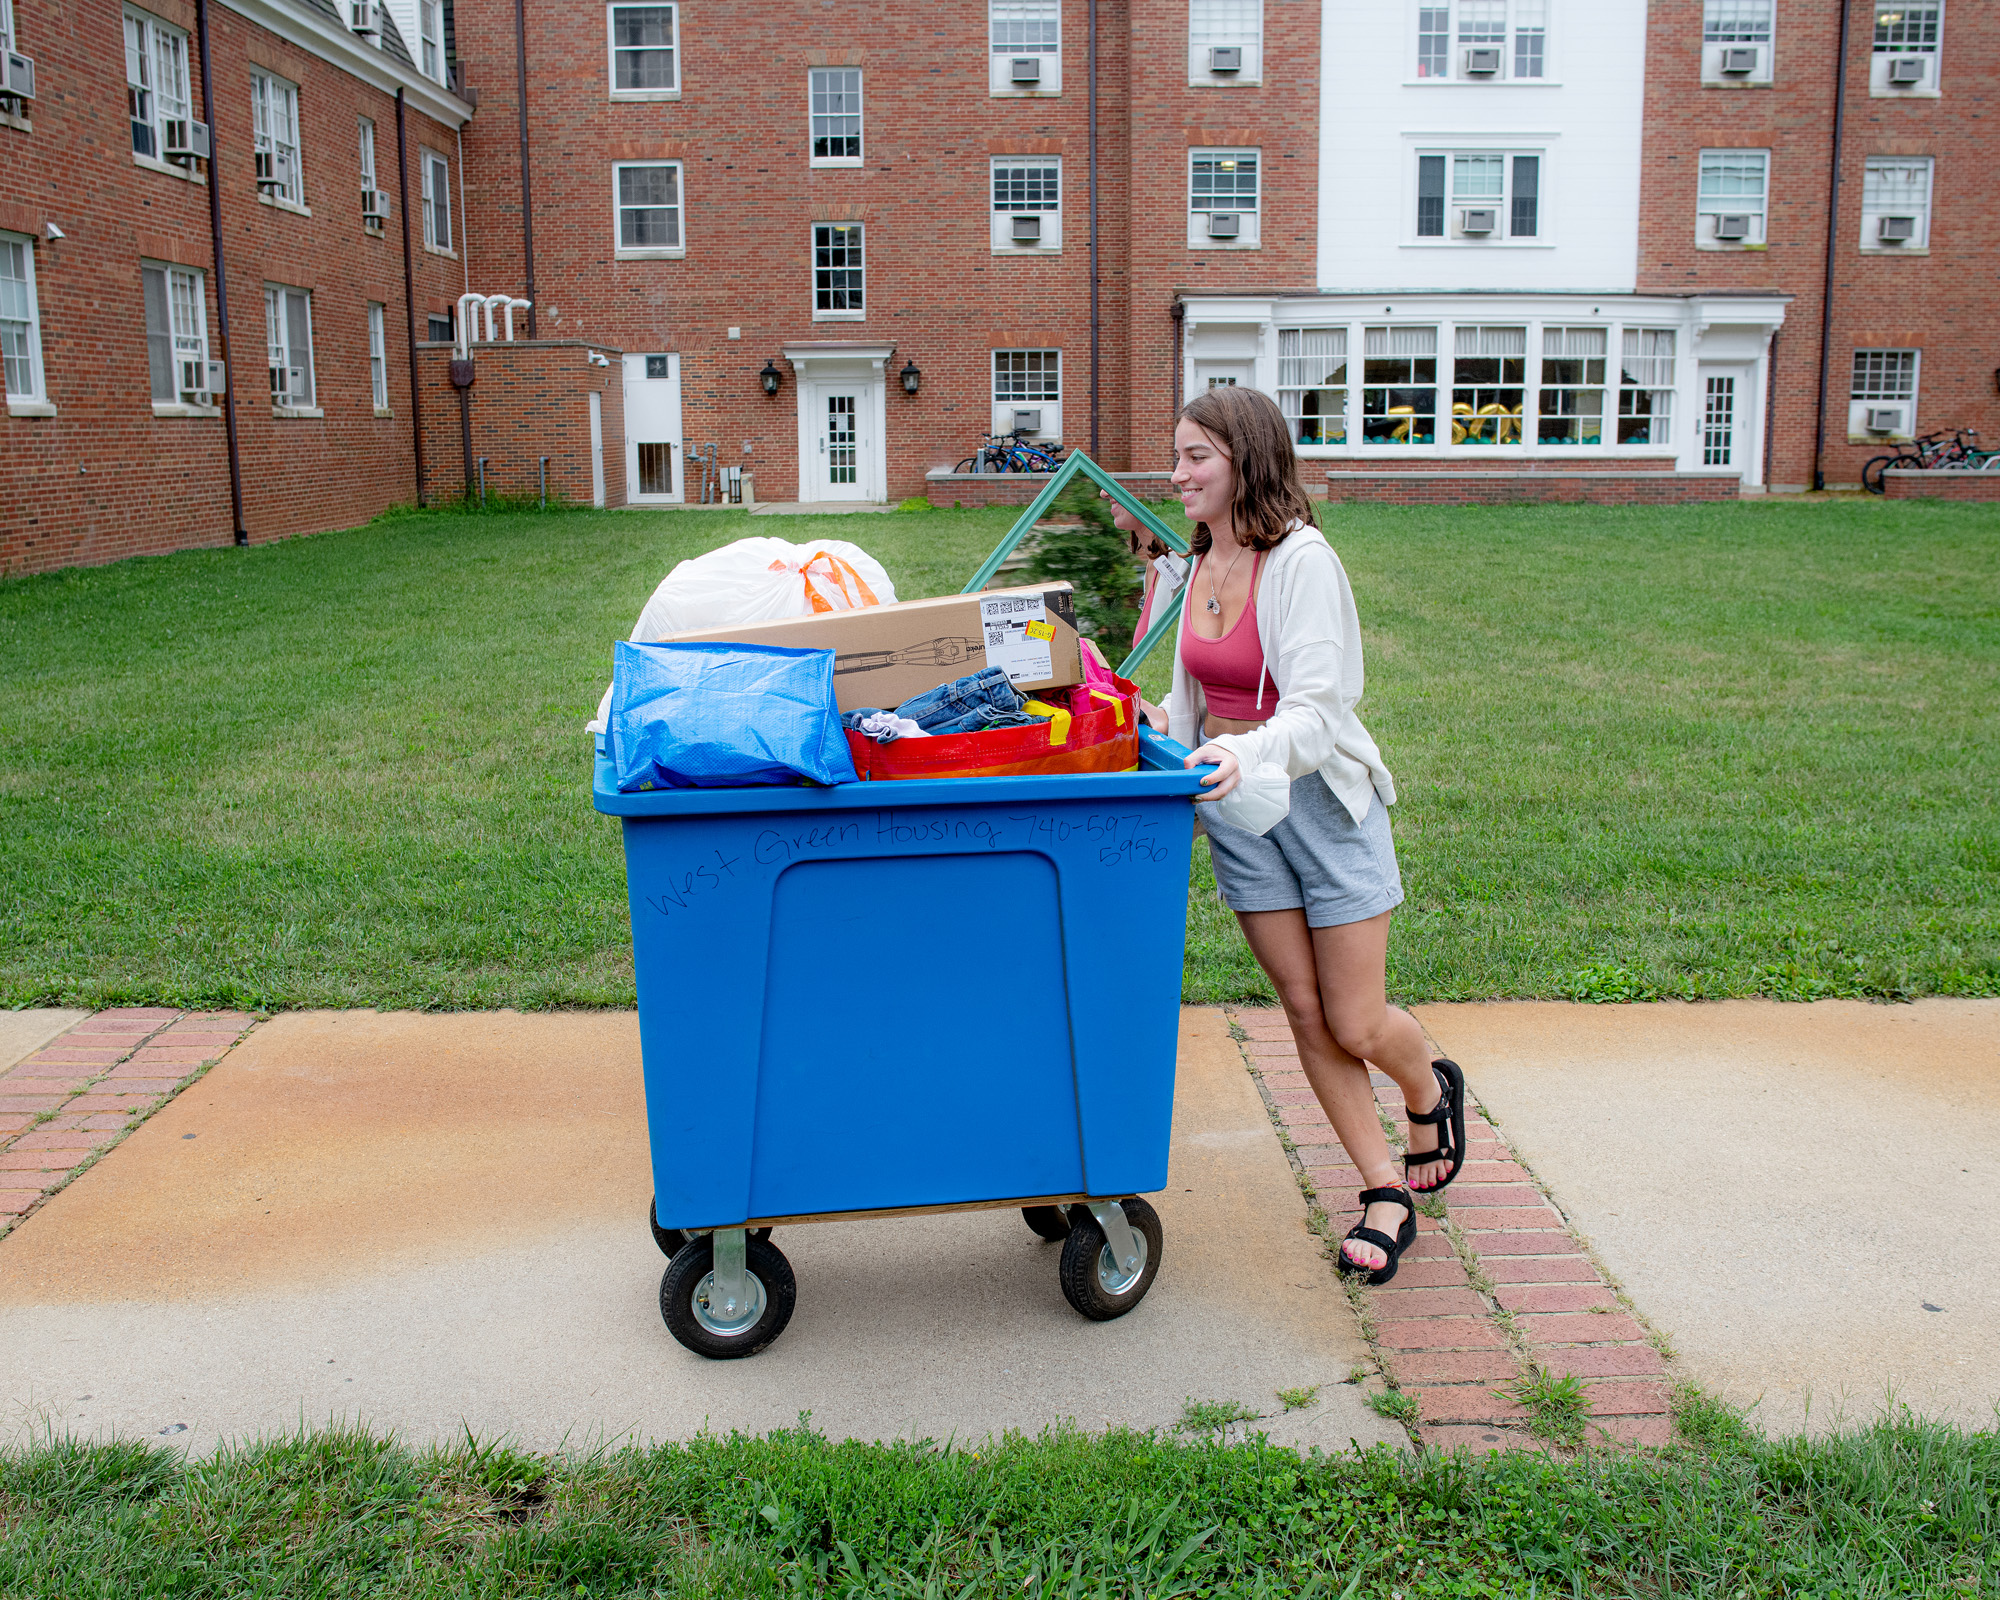 A woman pushes a large cart full of stuff in front of an West Green dormitory